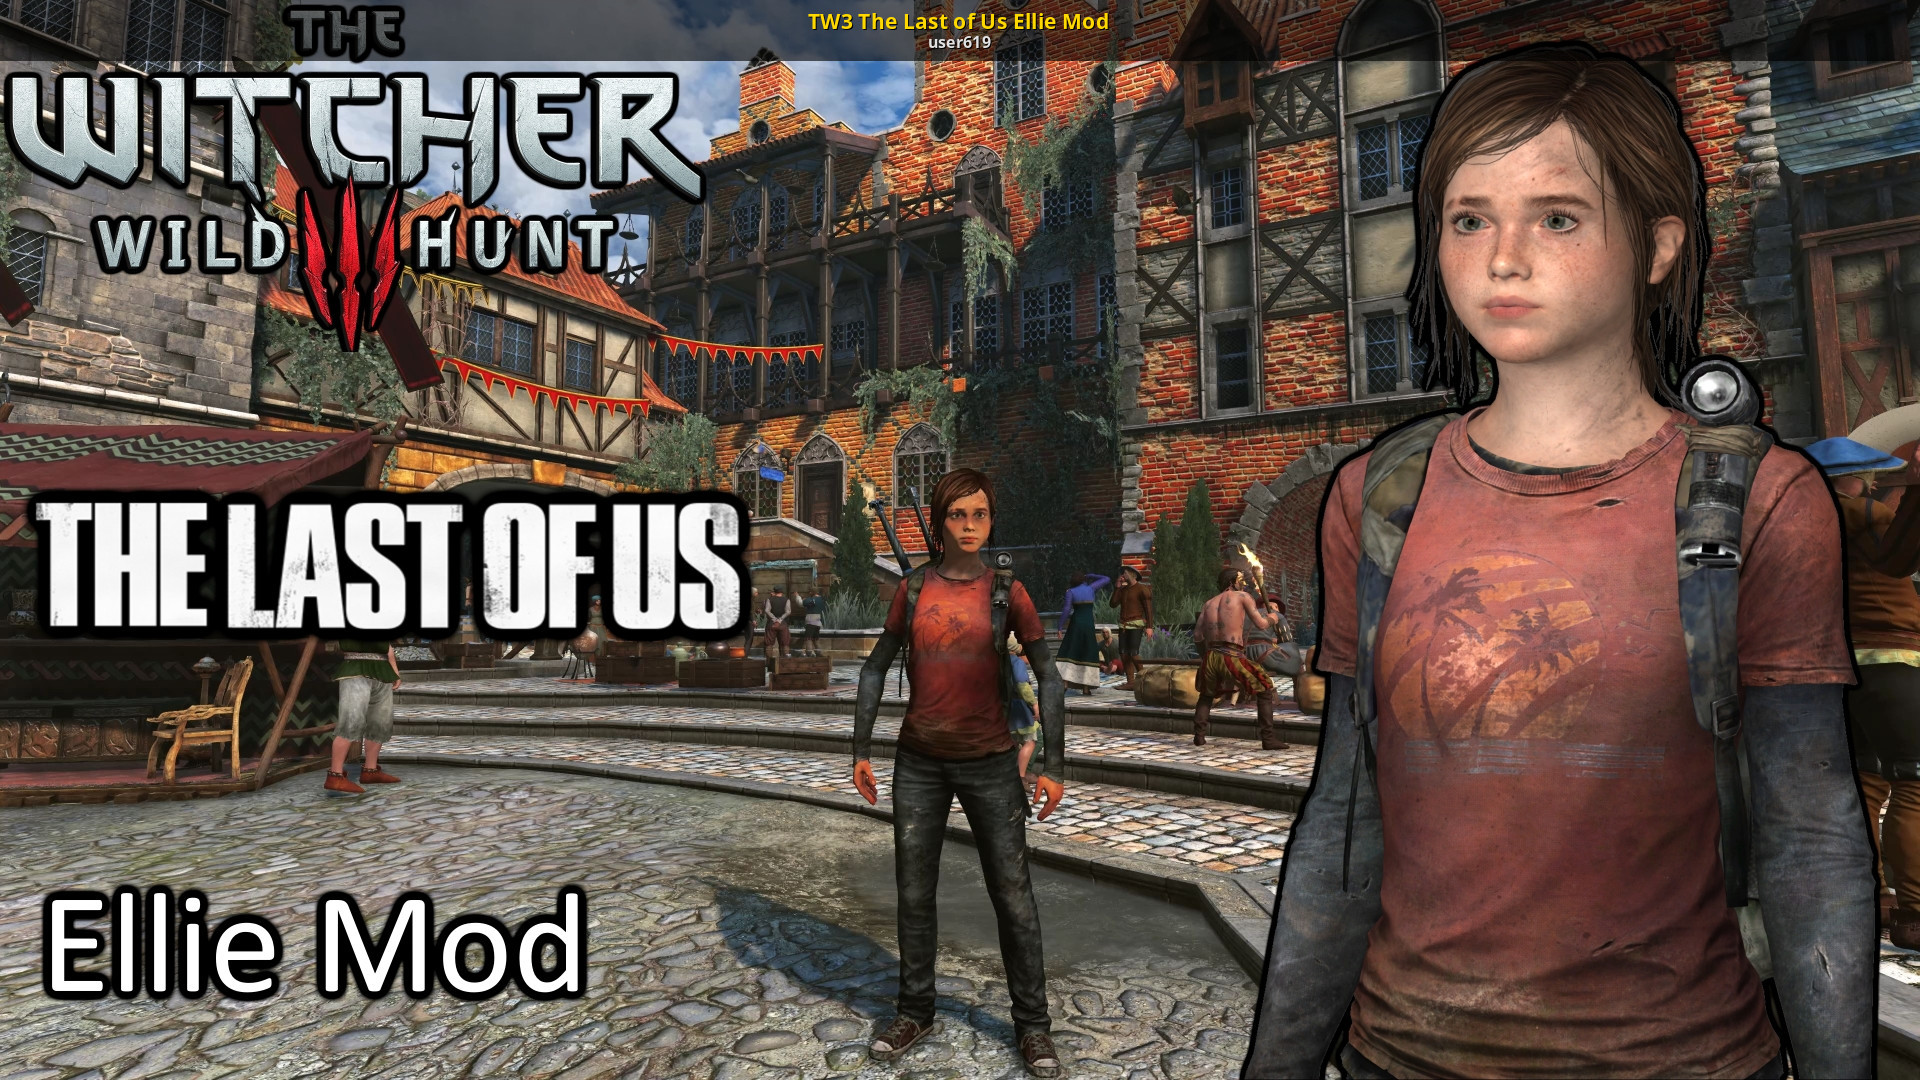 TW3 The Last of Us Ellie Mod [The Witcher 3] [Mods]